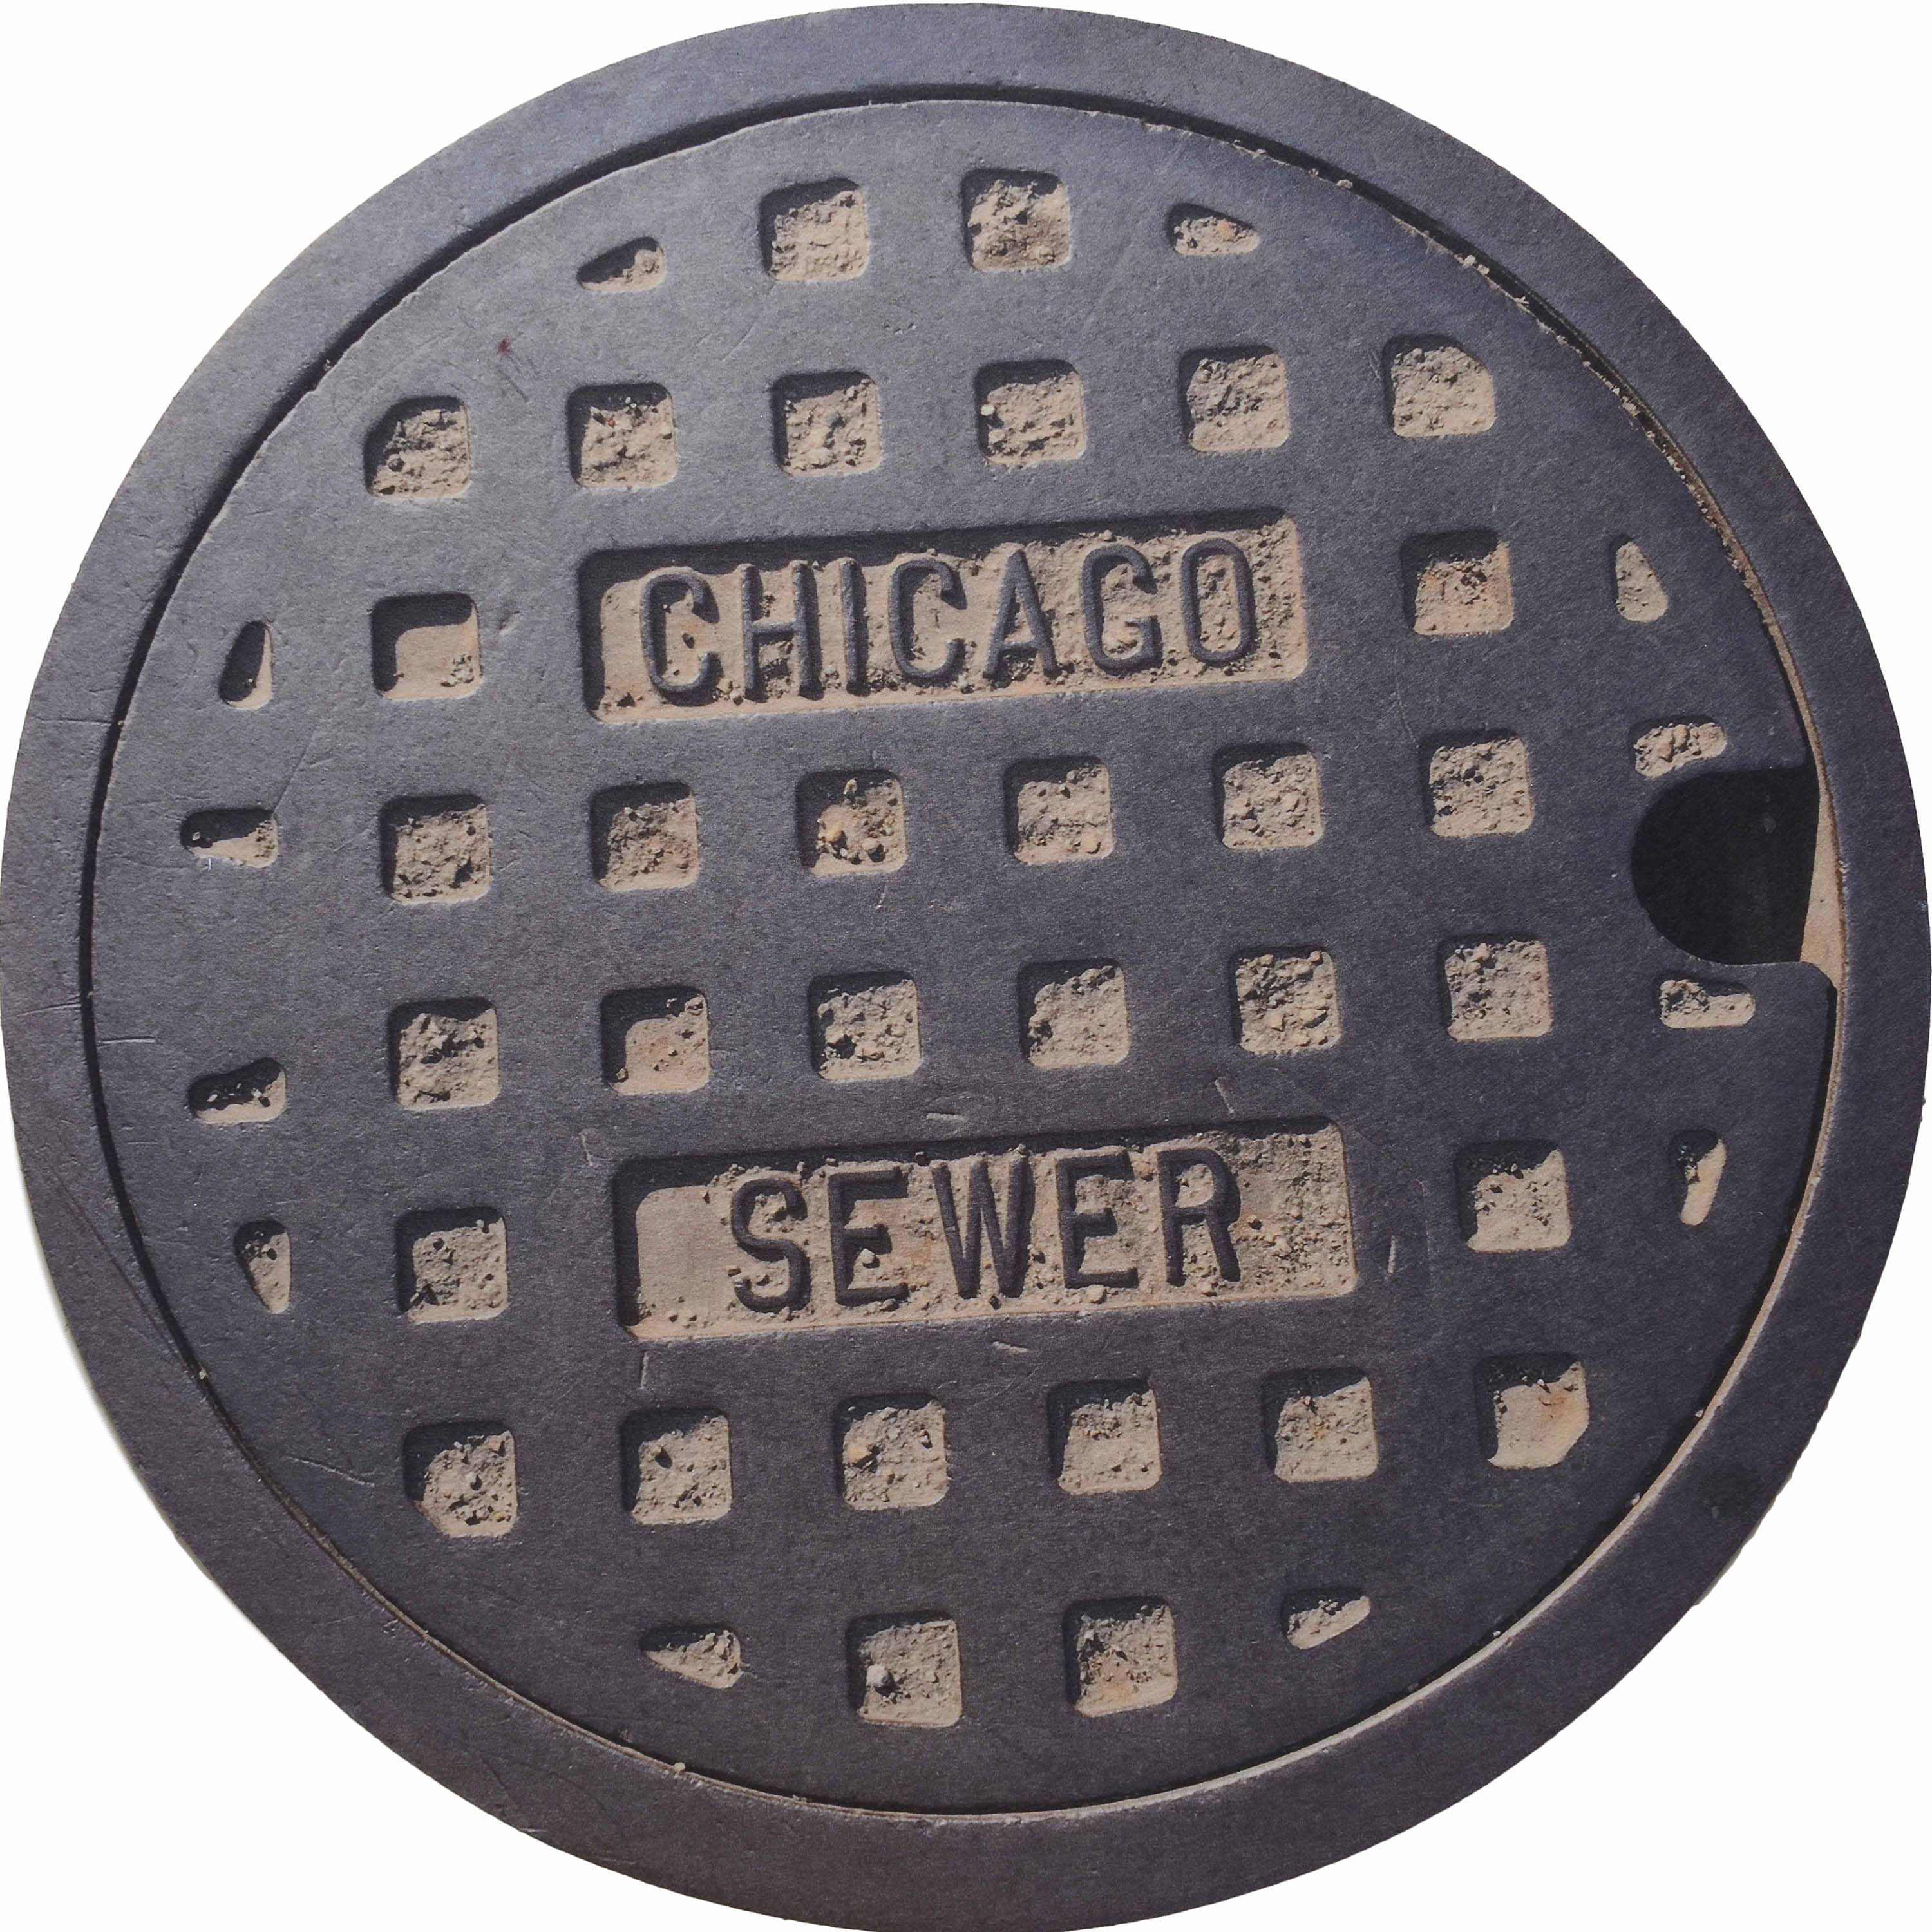 MIDWEST SERIES - Sewer Cover Doormat, Trivet, Coaster - Chicago, IL